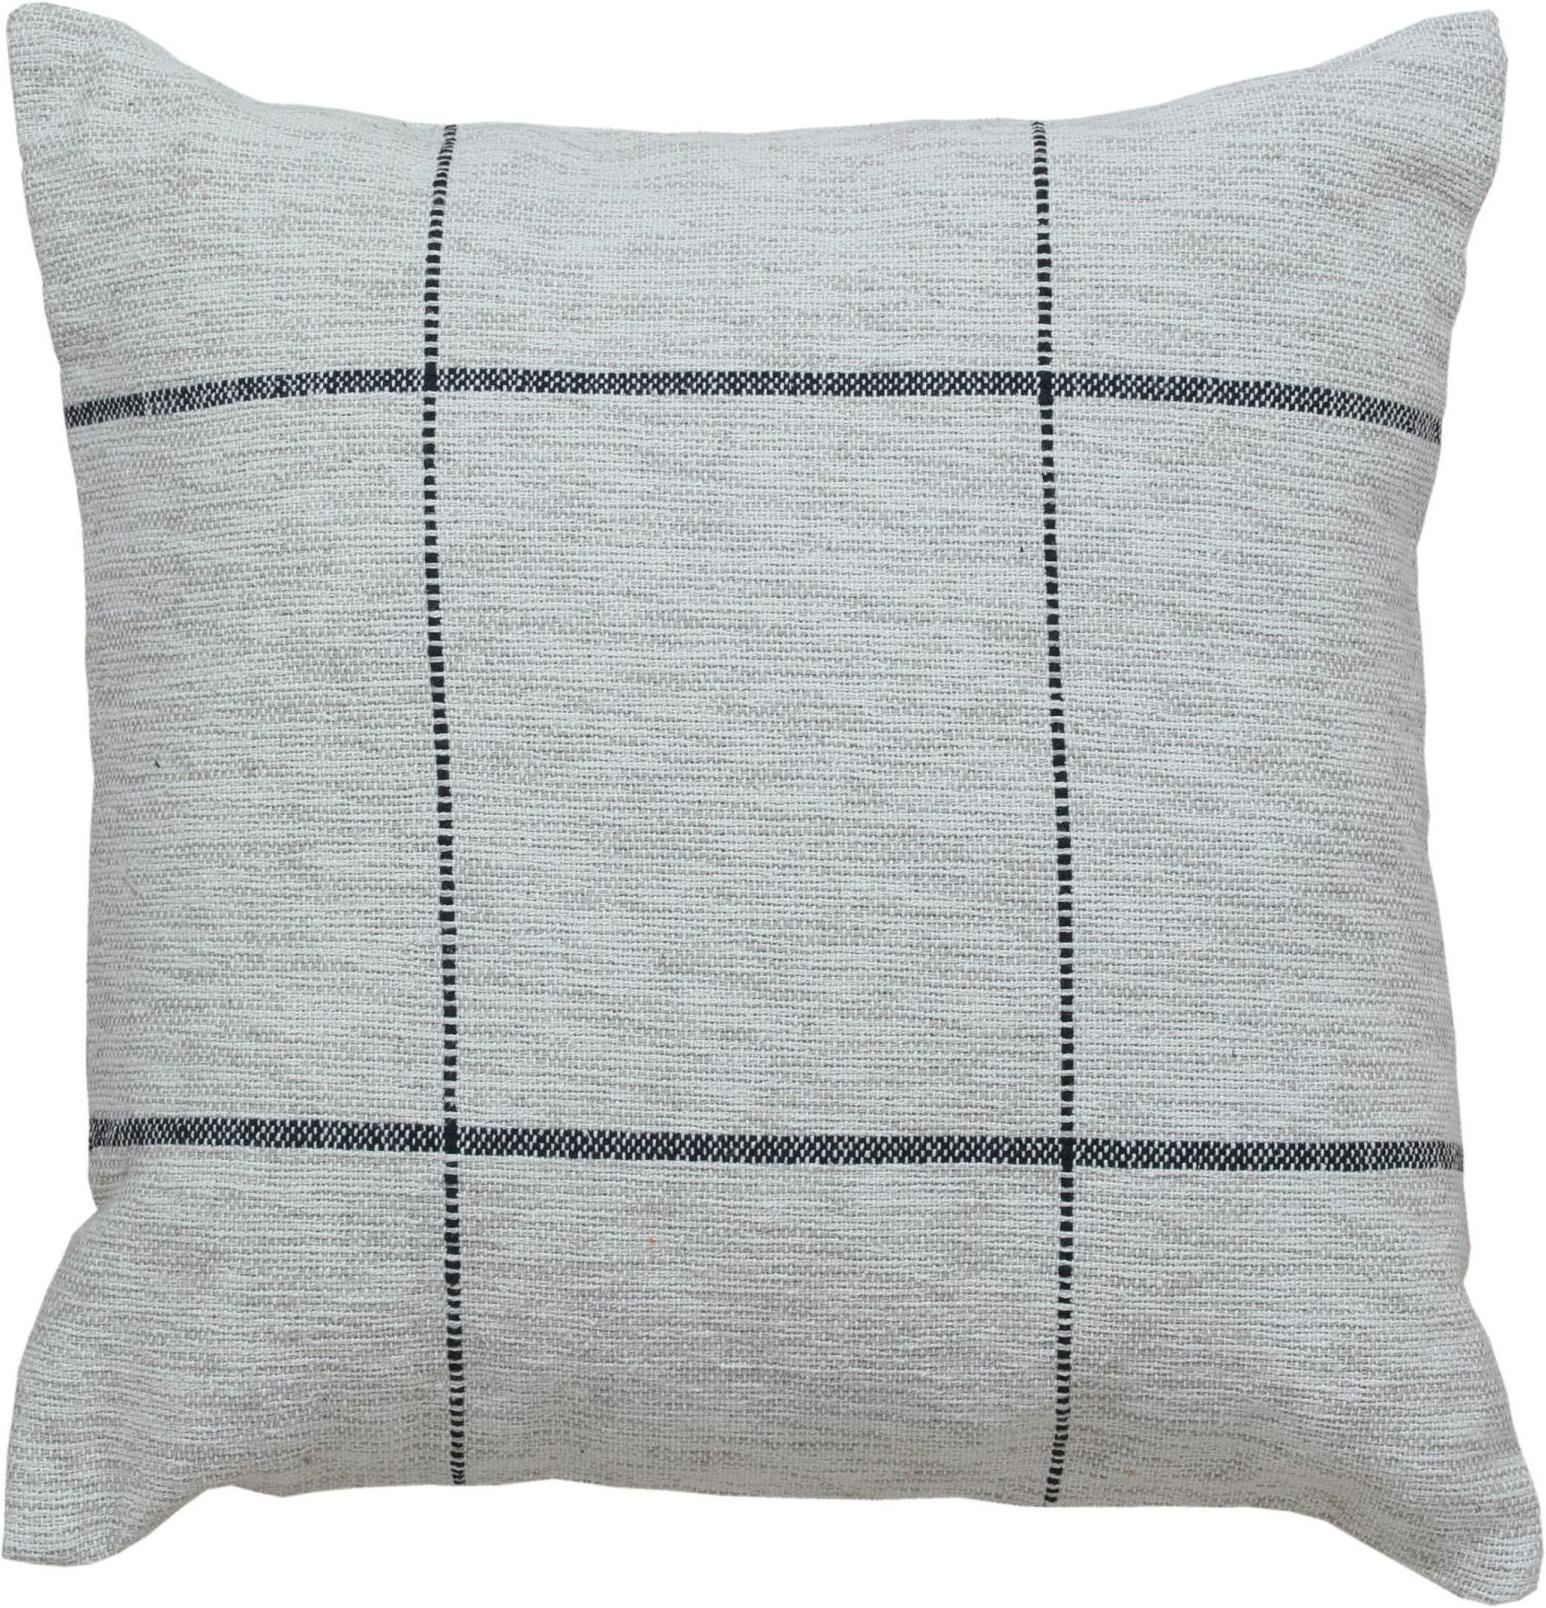 Modern Contemporary Wool and Cotton Pillow In Gray and Beige with Geometric Parttern For Sale